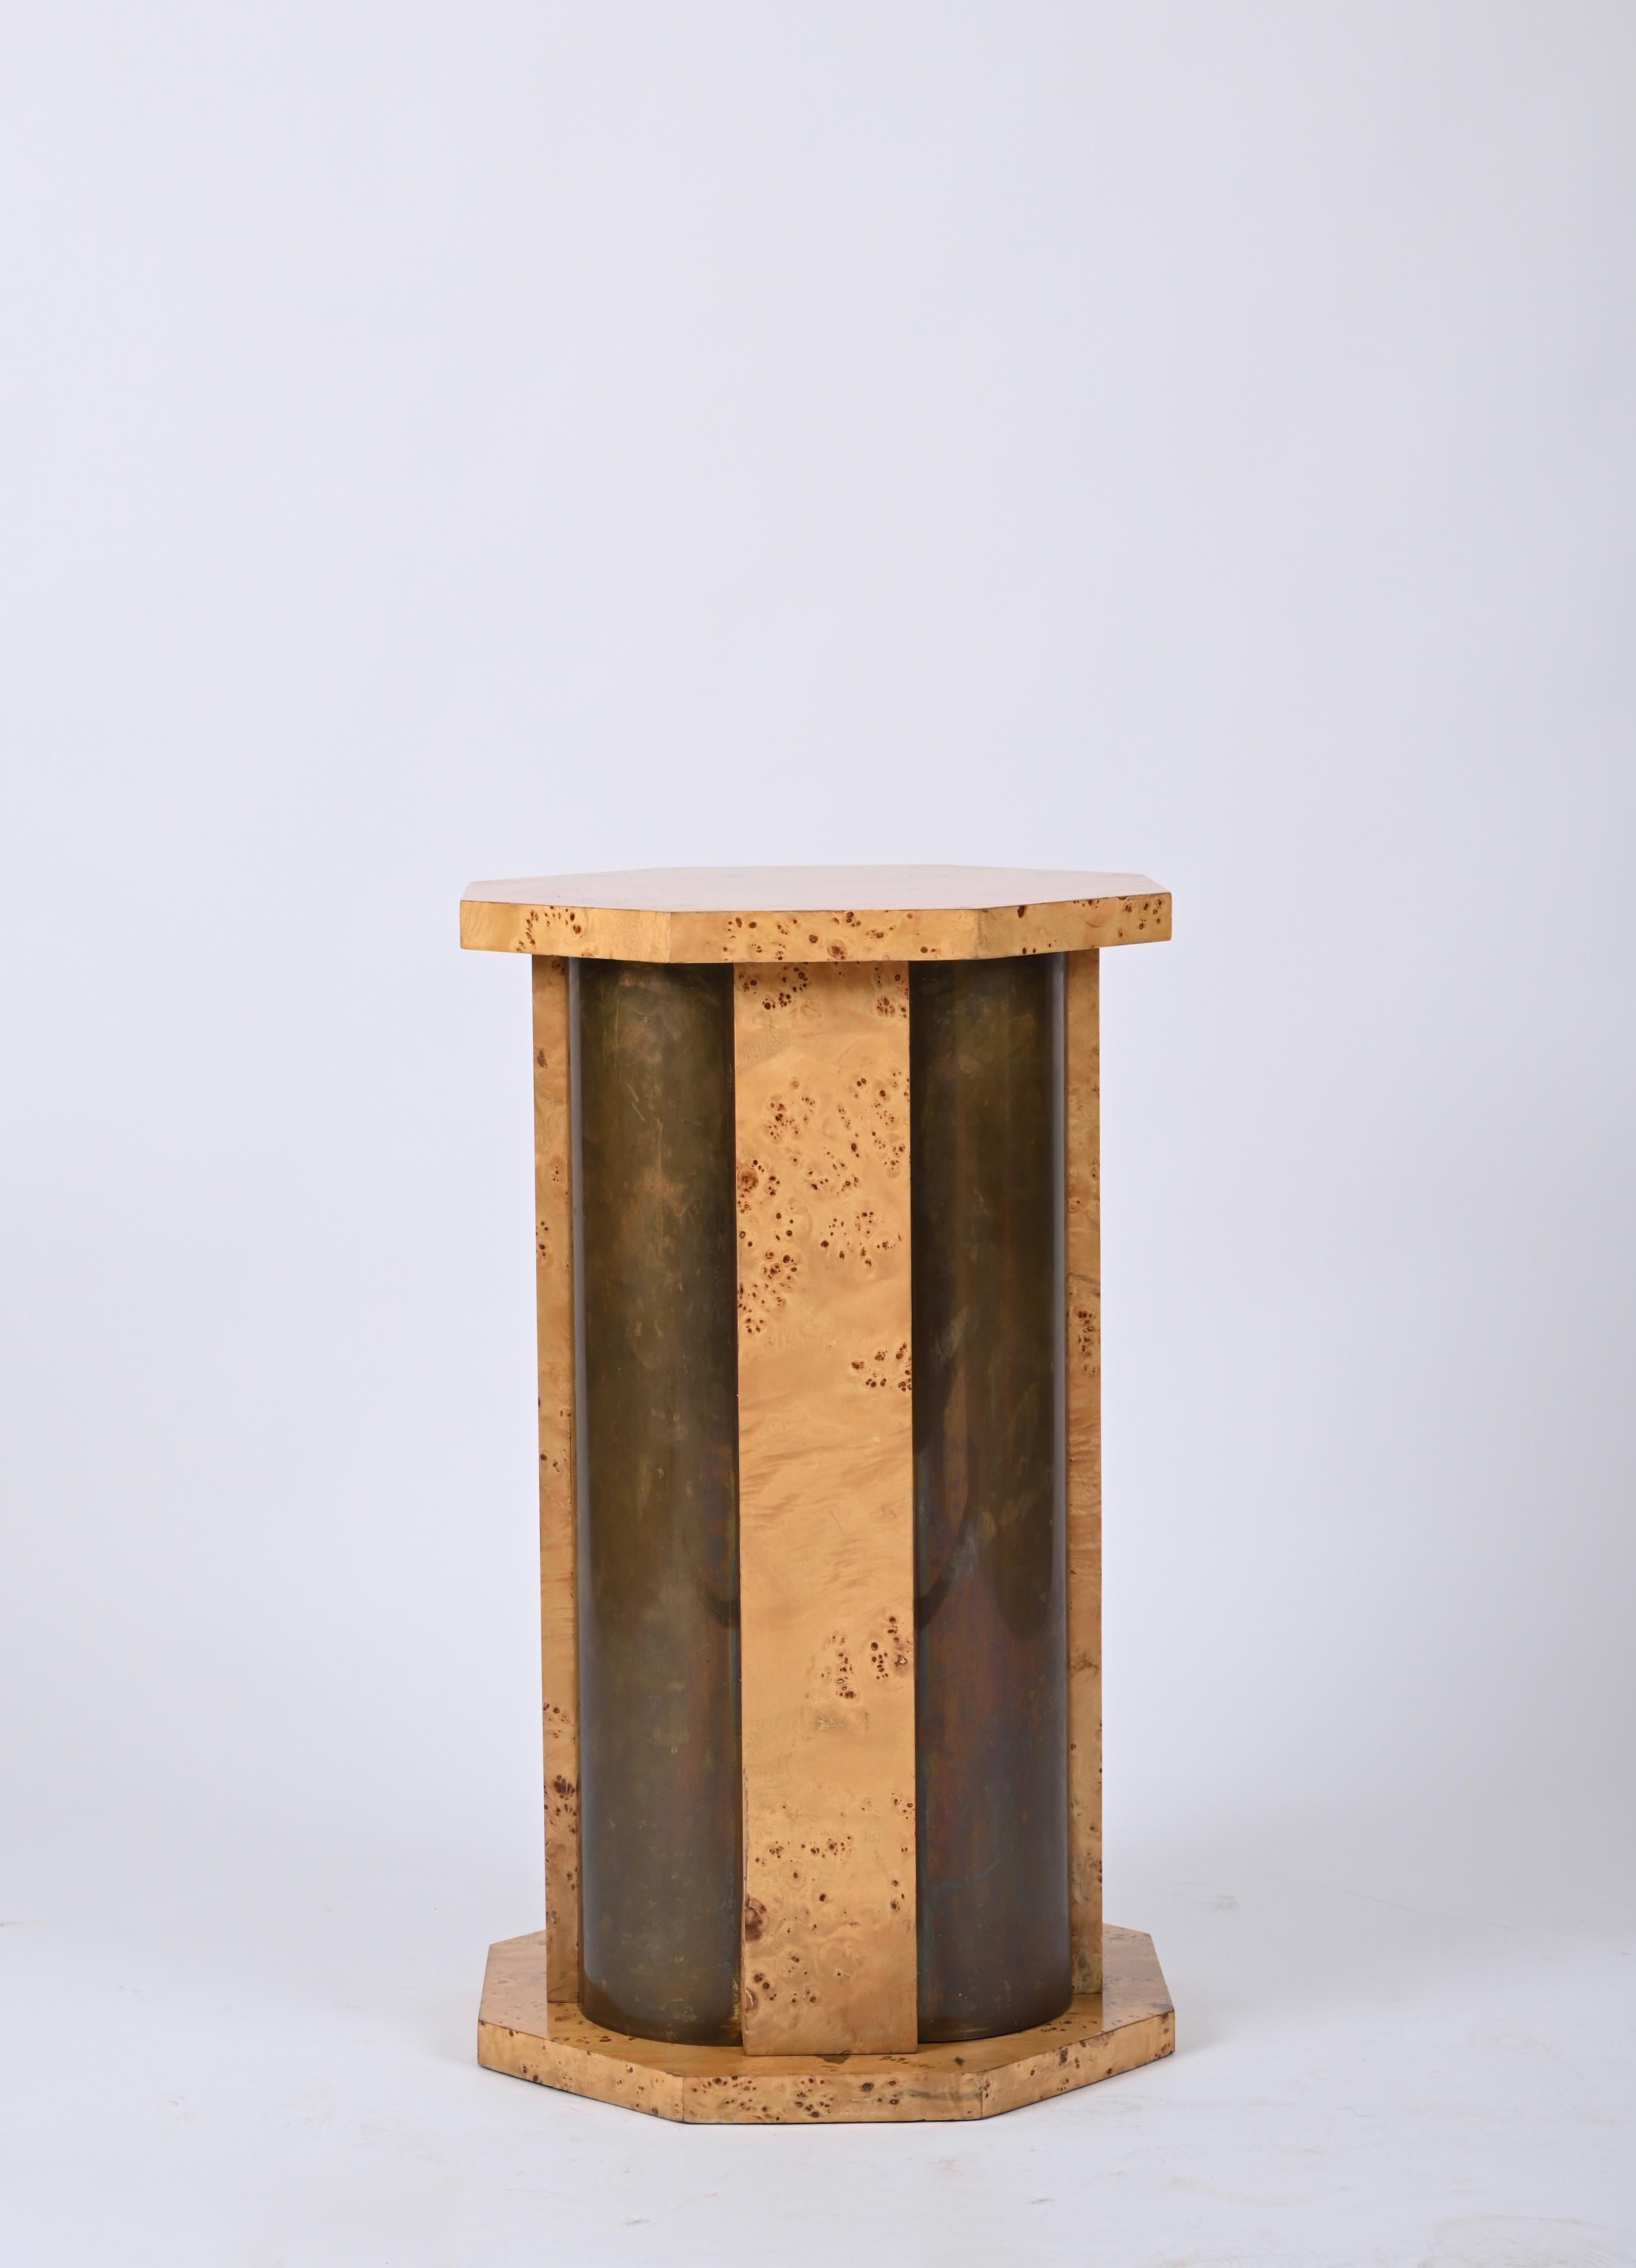 Tommaso Barbi Octagonal Table Pedestal in Burl Wood and Brass, Italy, 1970 For Sale 1